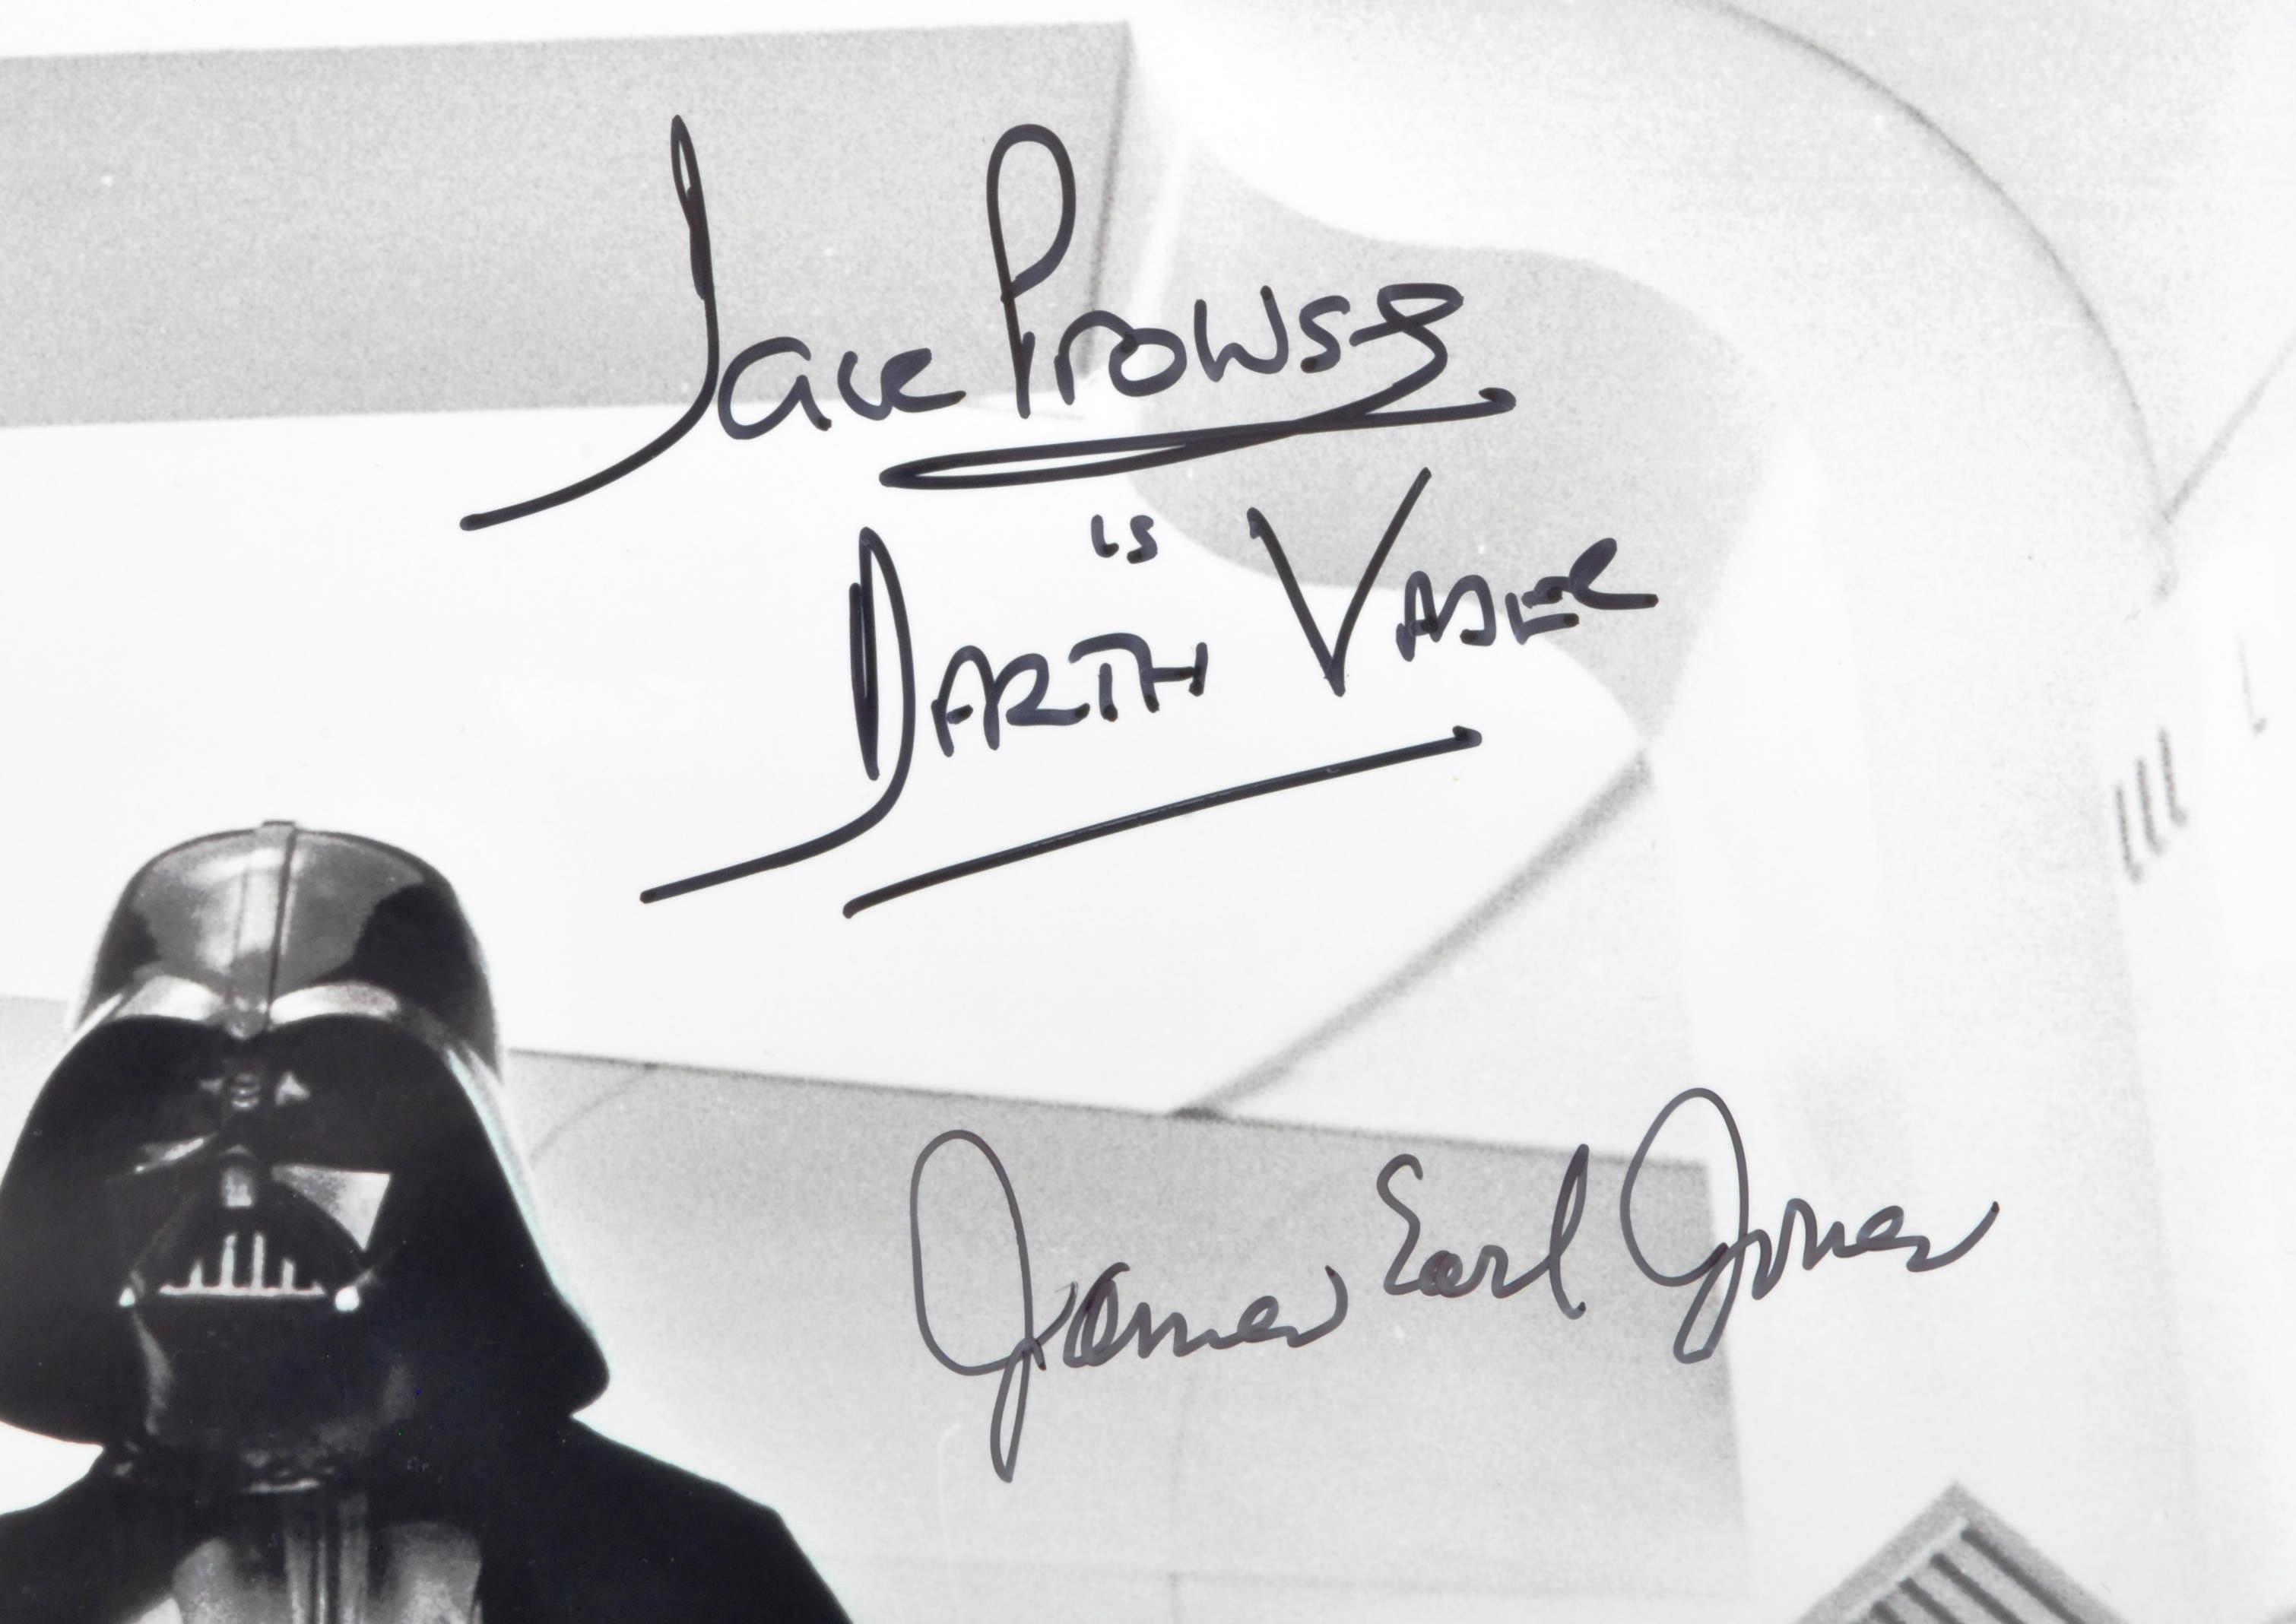 STAR WARS - A NEW HOPE - DARTH VADER TRIPLE-SIGNED PHOTOGRAPH - Image 2 of 3